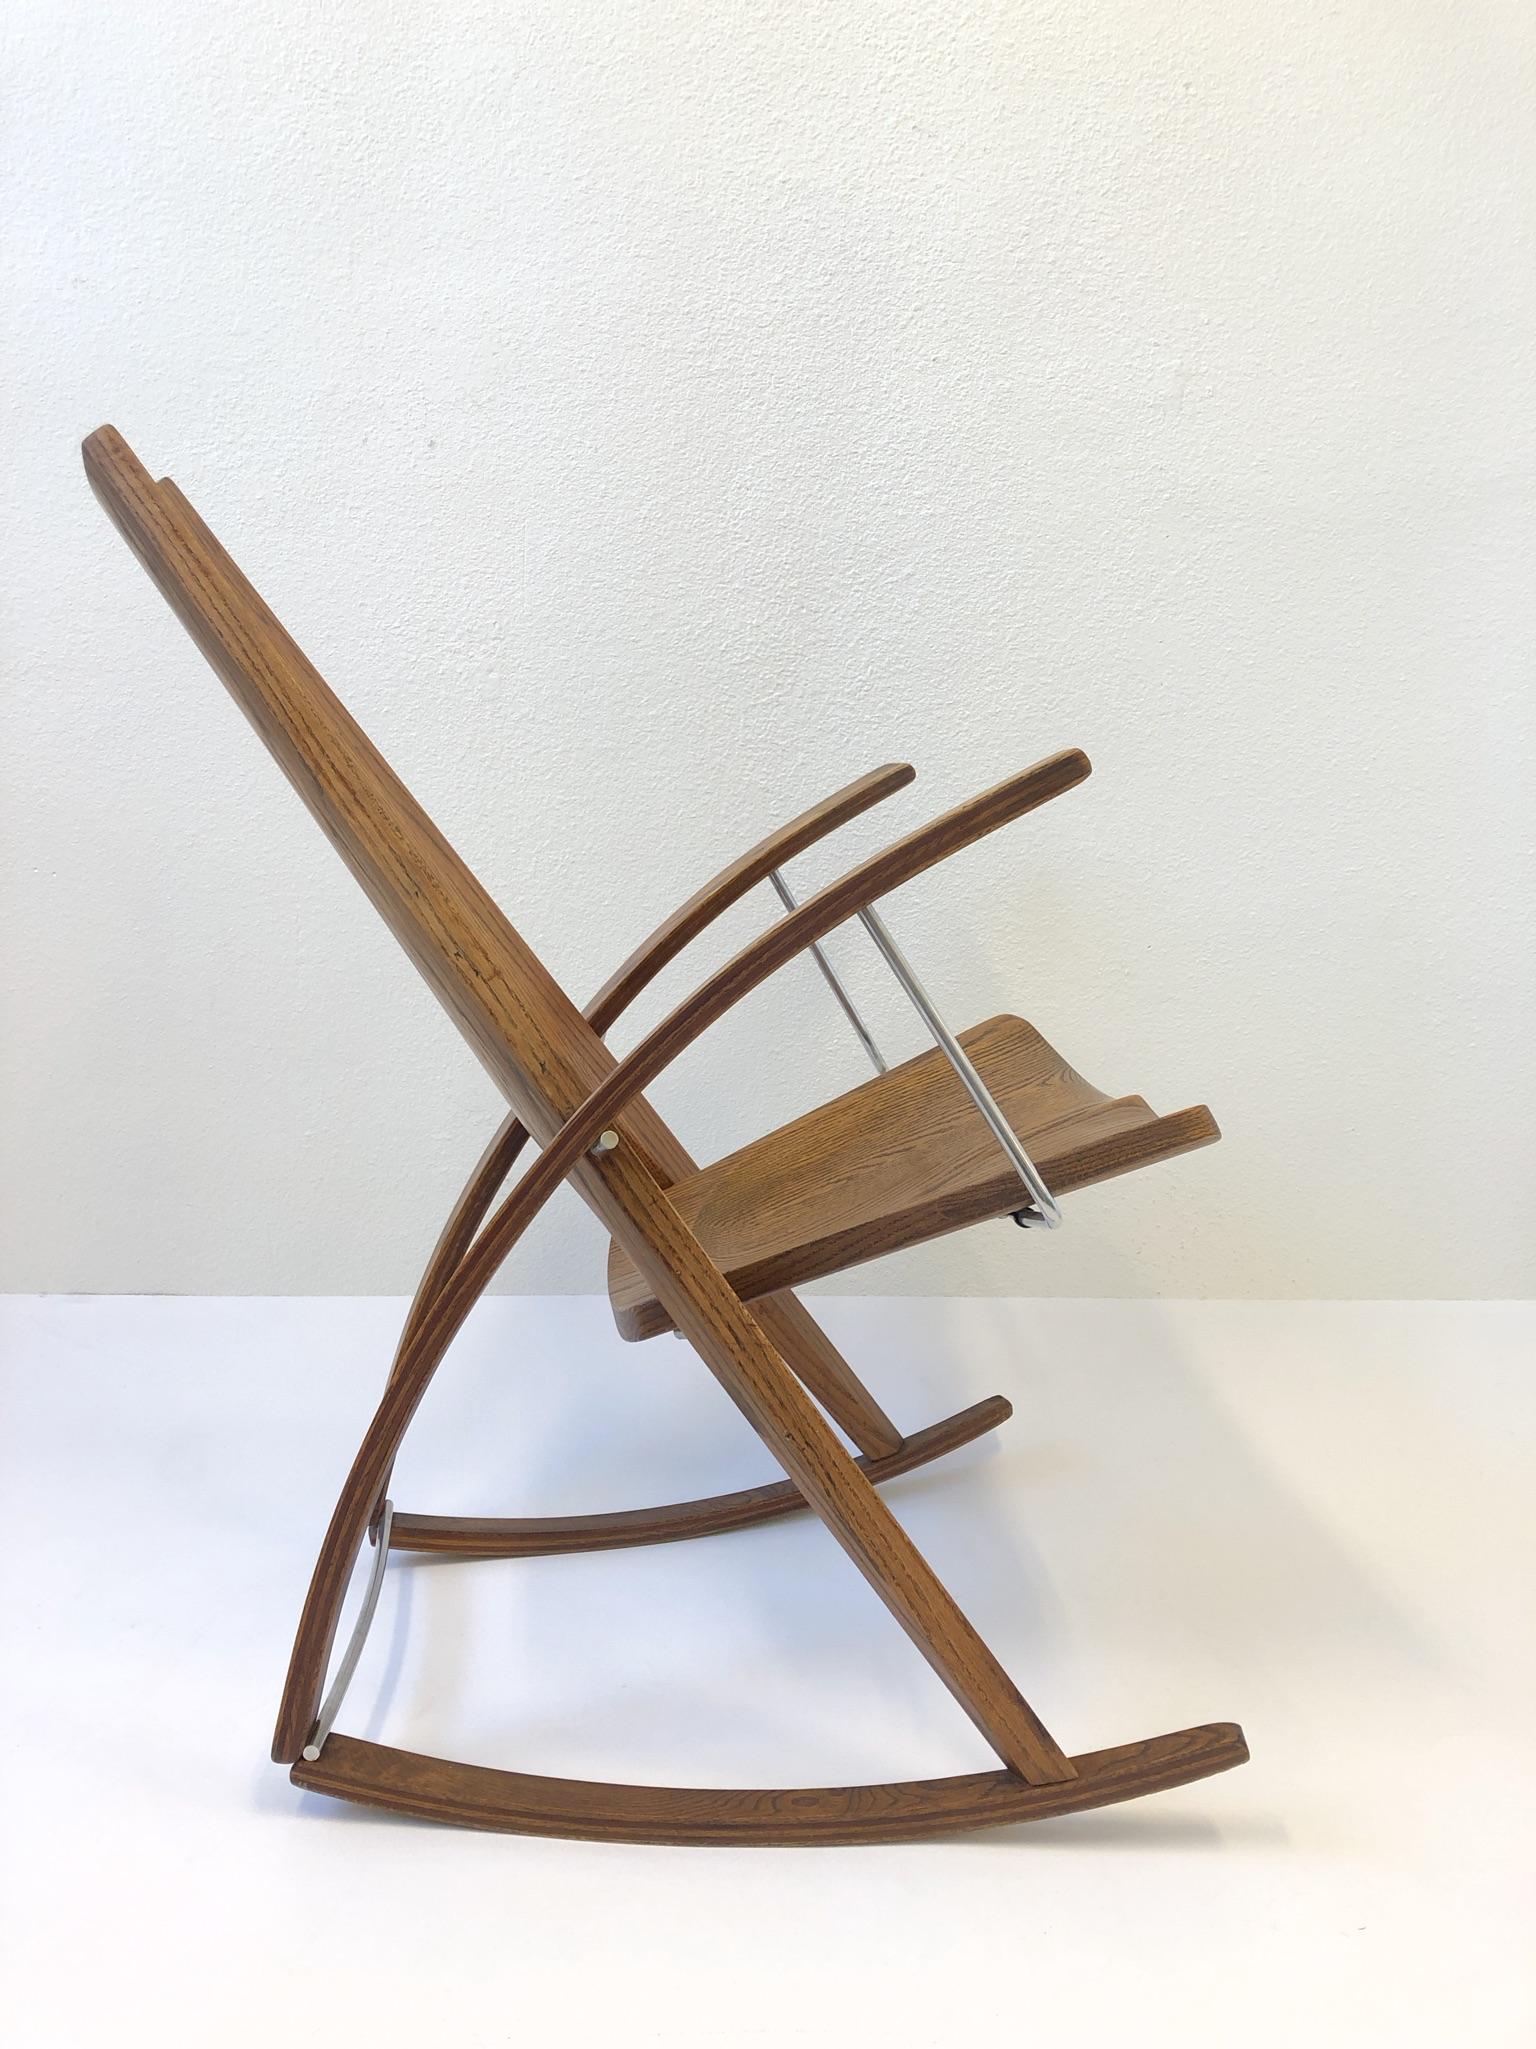 An amazing 1980s studio rocking chair by Leon Mayer. The chair is hand signed by Leon Mayer dated 1980 and numbered 169. The rocking chair is constructed of solid oak and polish stainless steel.
Overall dimensions: 36” high 32” deep 24.5” wide 19”